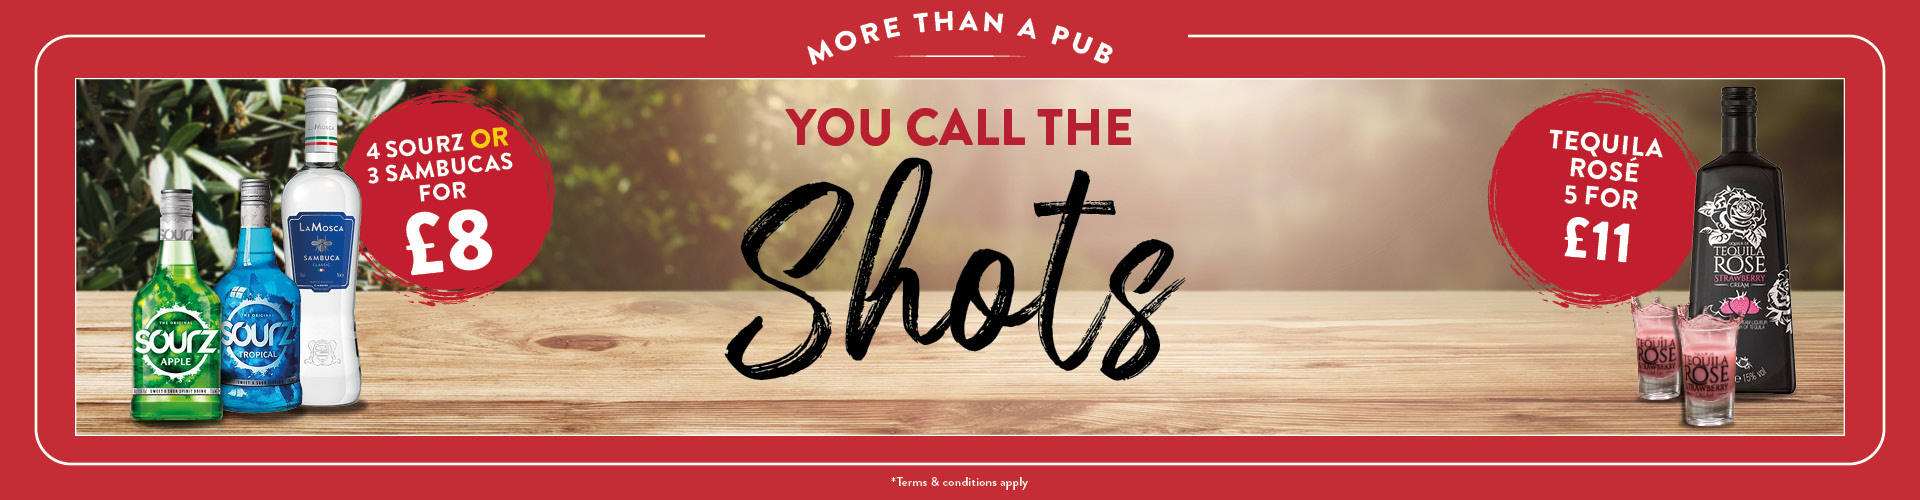 Shot bundle drink offers at your local Craft Union pub